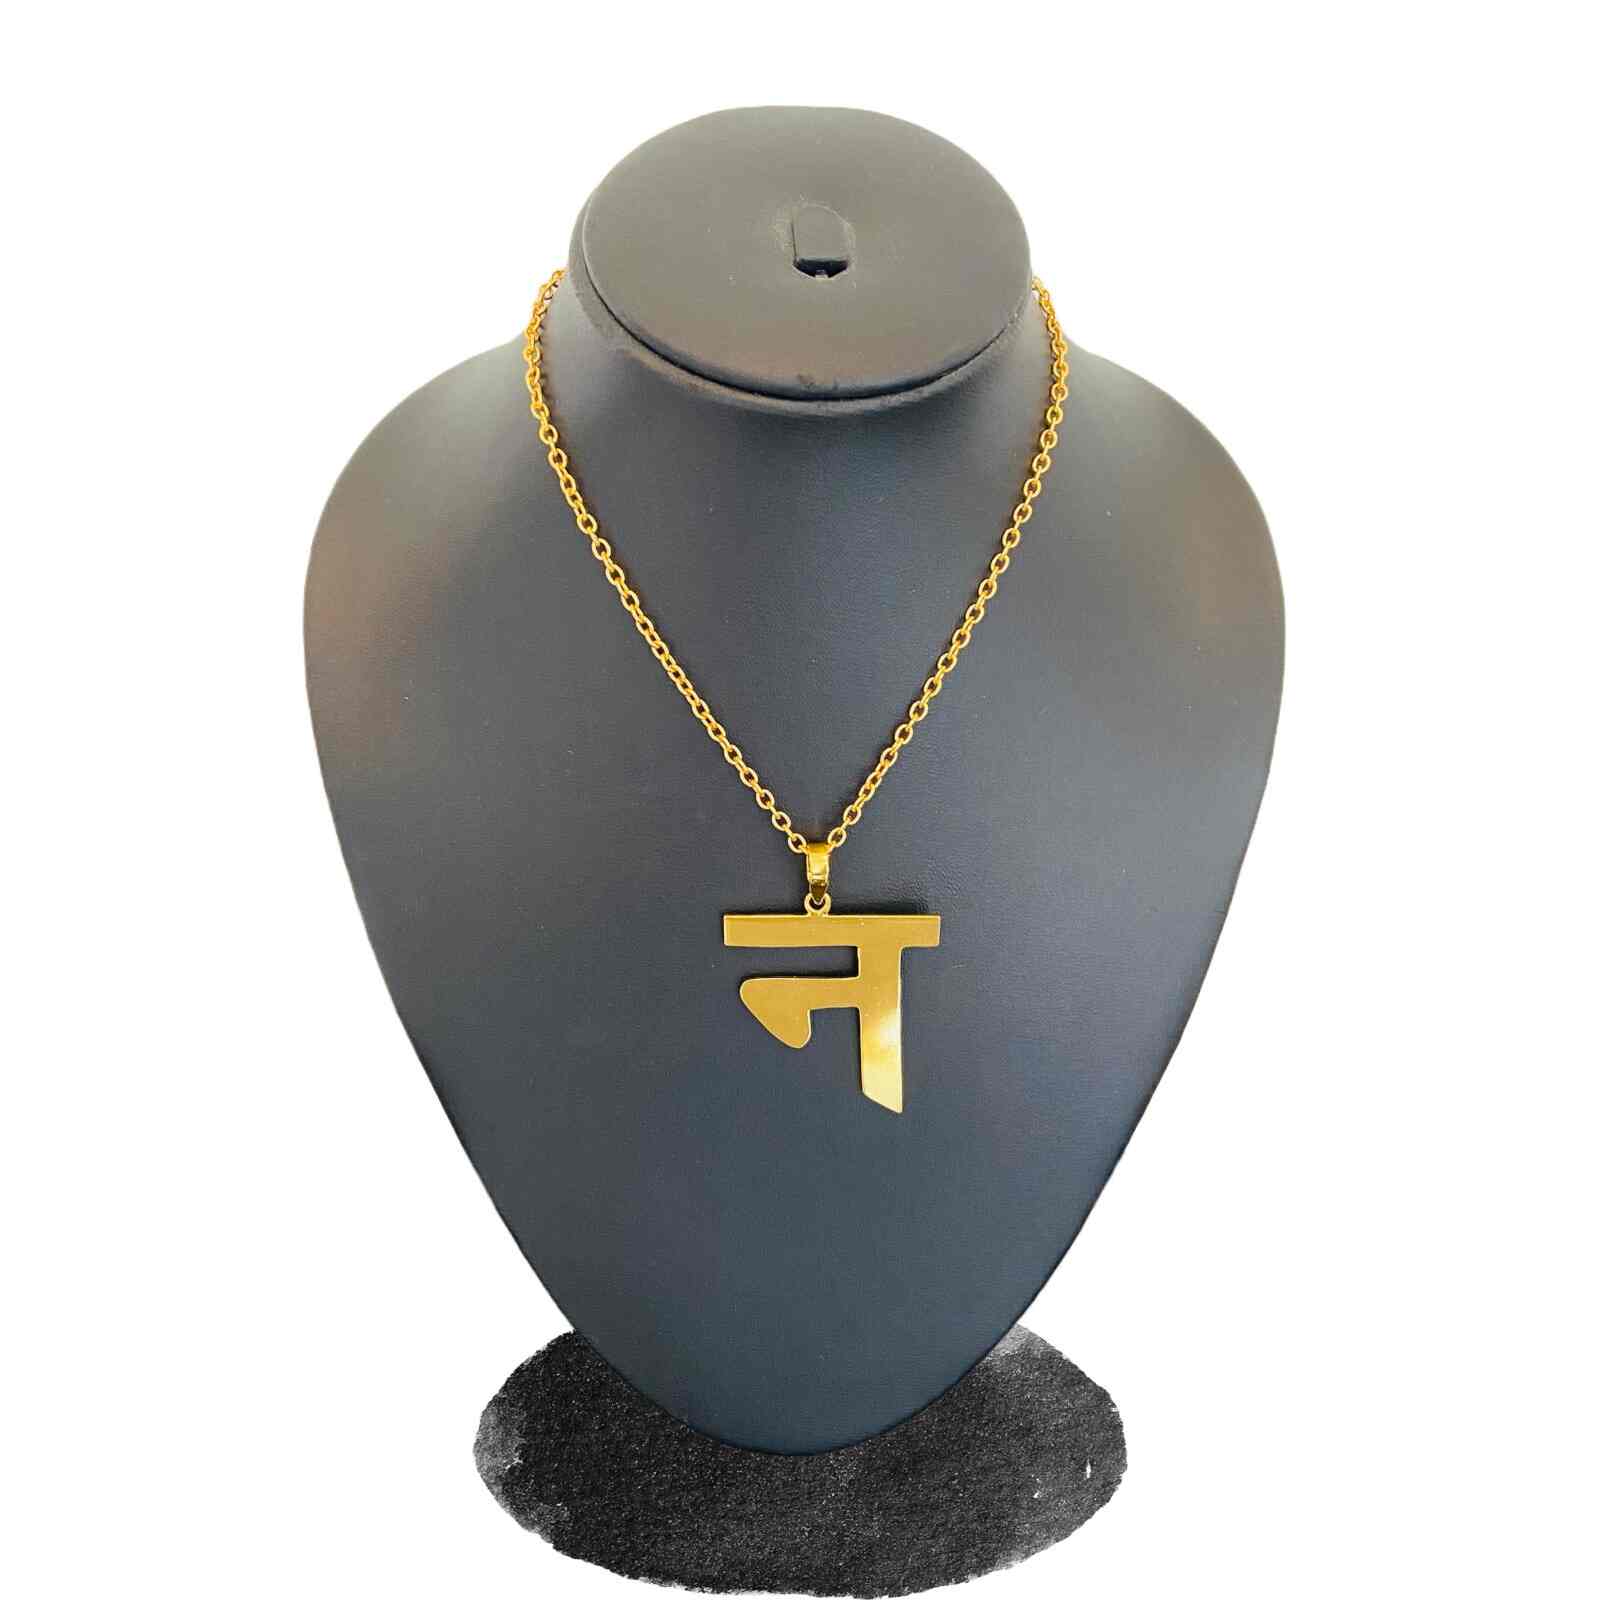 Stainless Steel Tokio Hotel Necklace for Men Women Hip Hop Rock Gold Color  Pendant Music Band Necklaces Jewelry Gifts N2655-2S08 – the best products  in the Joom Geek online store